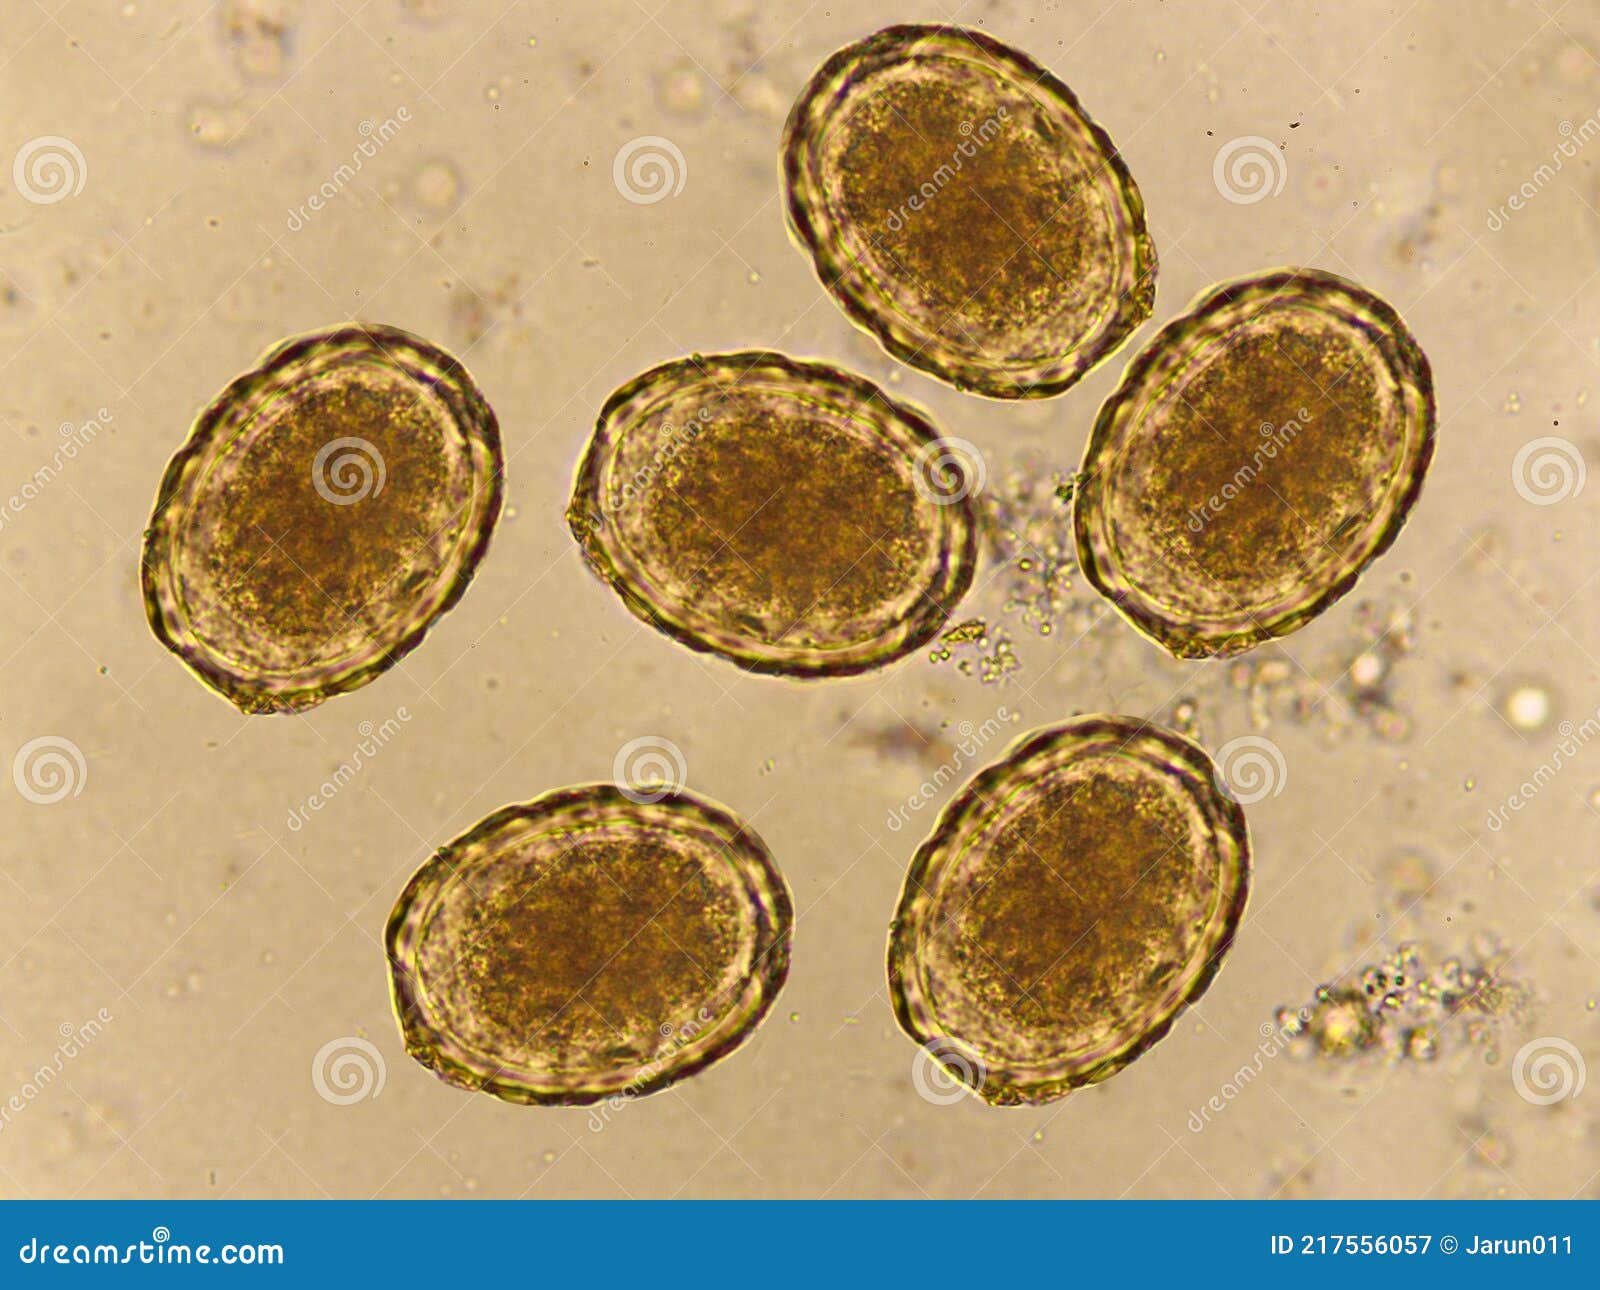 roundworm eggs in humans